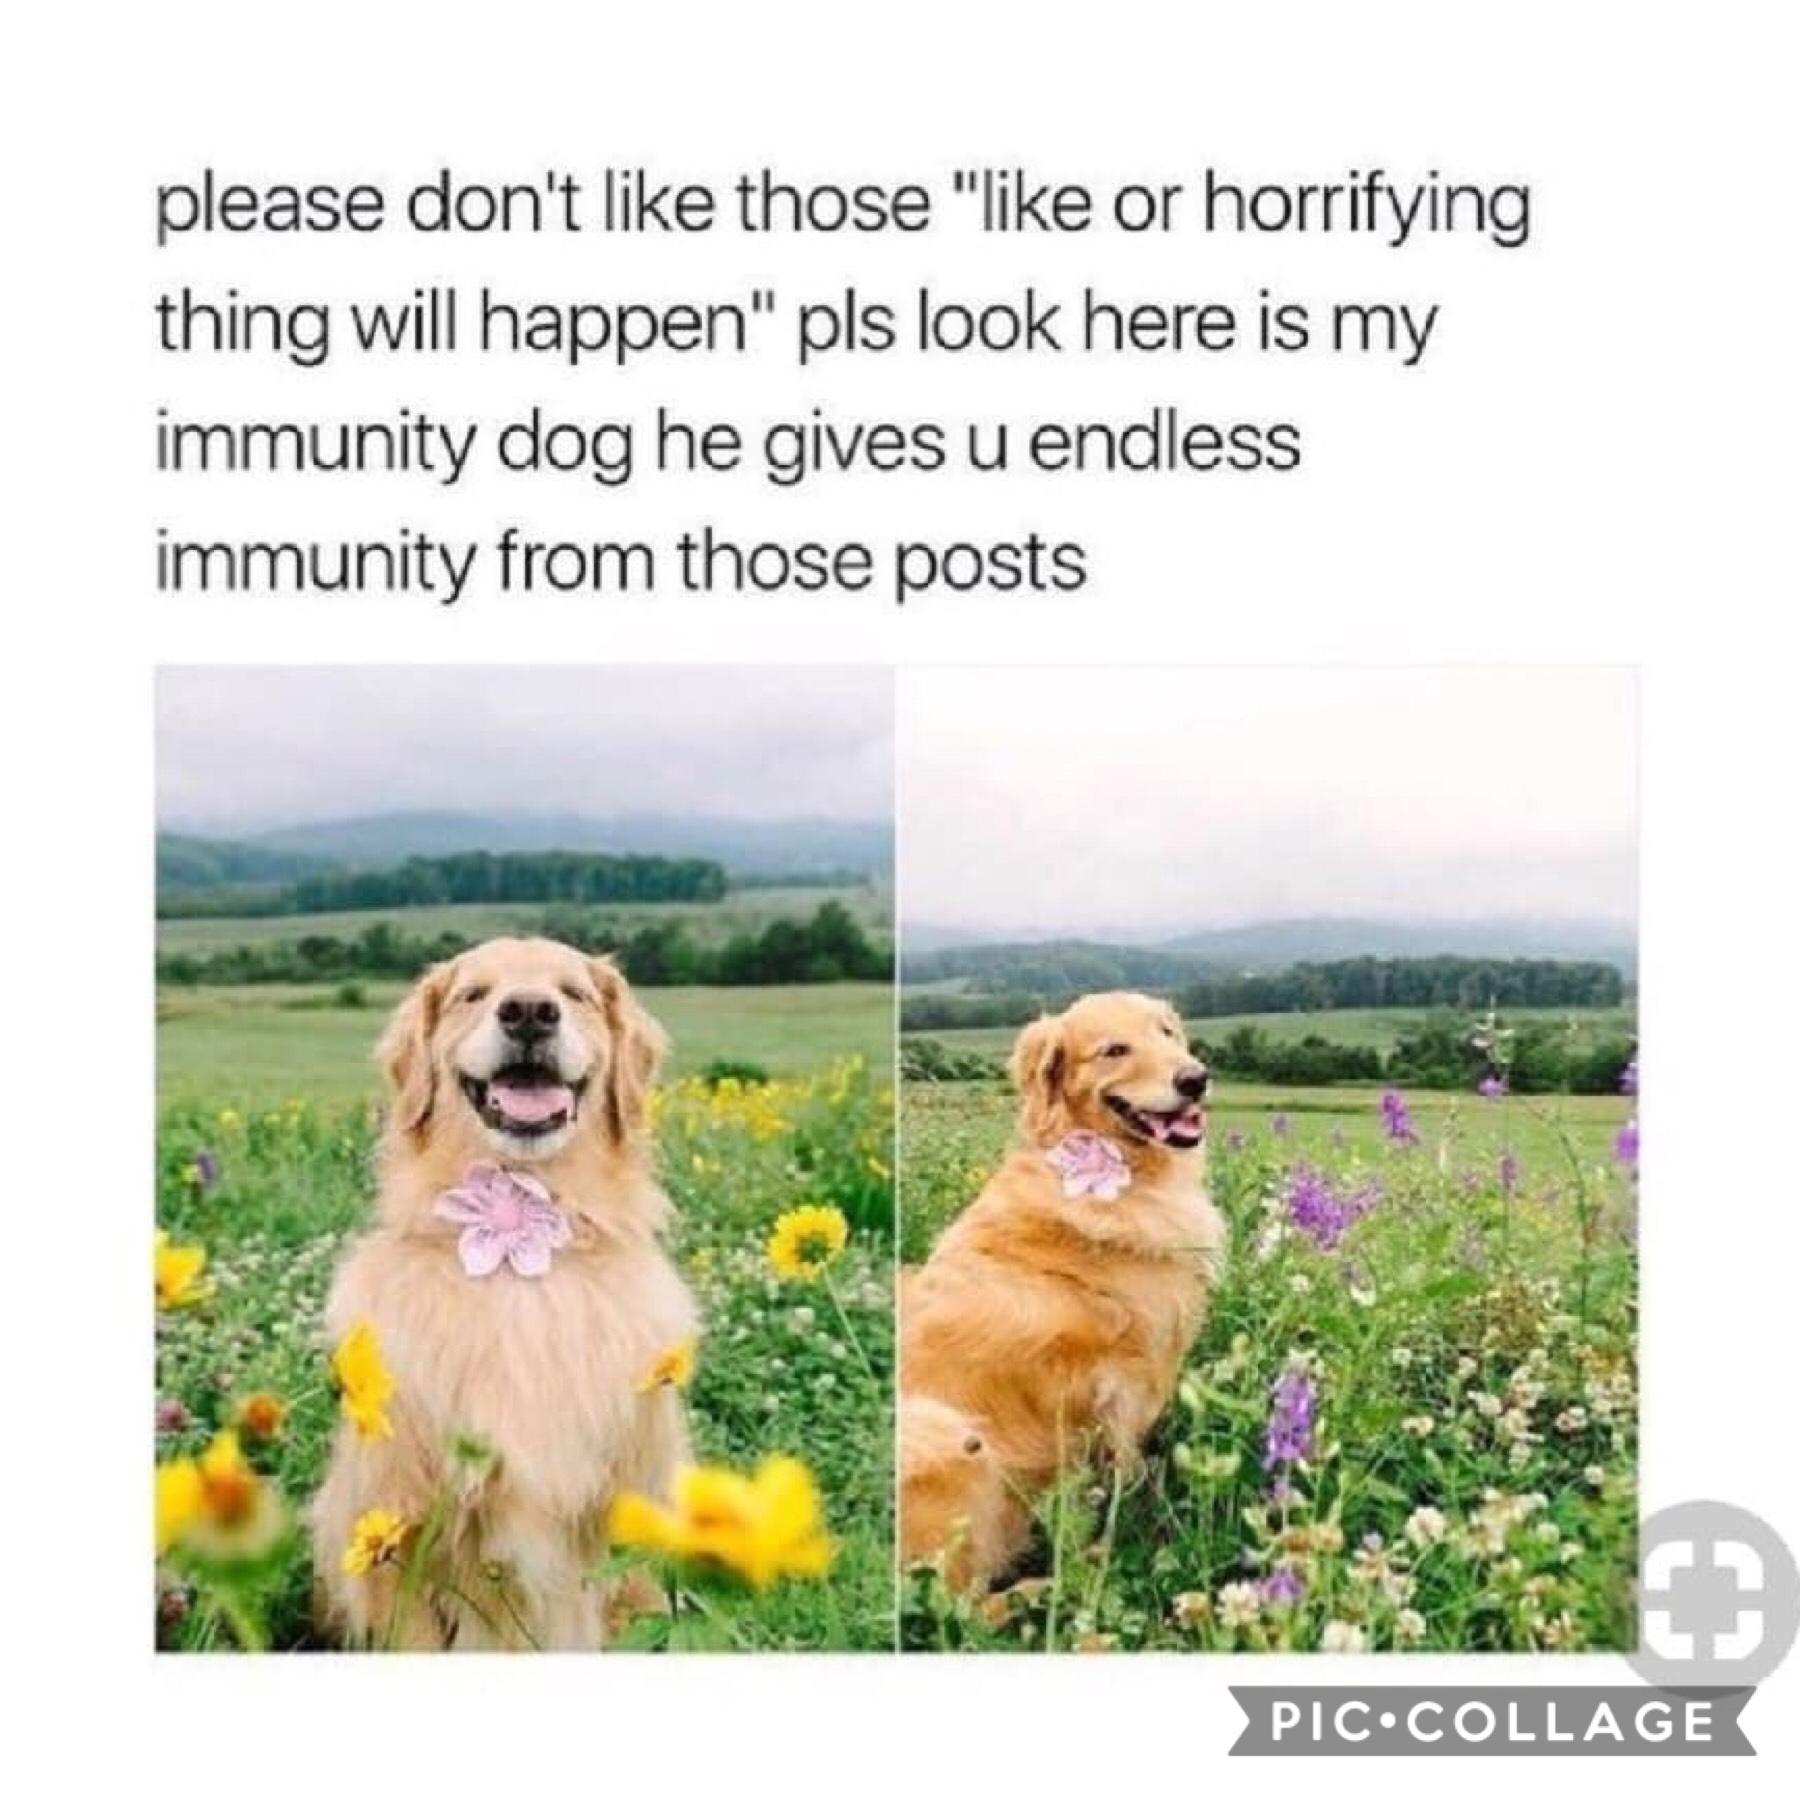 Save me immunity dog😅
My account is such an oxymoron😅😓💗